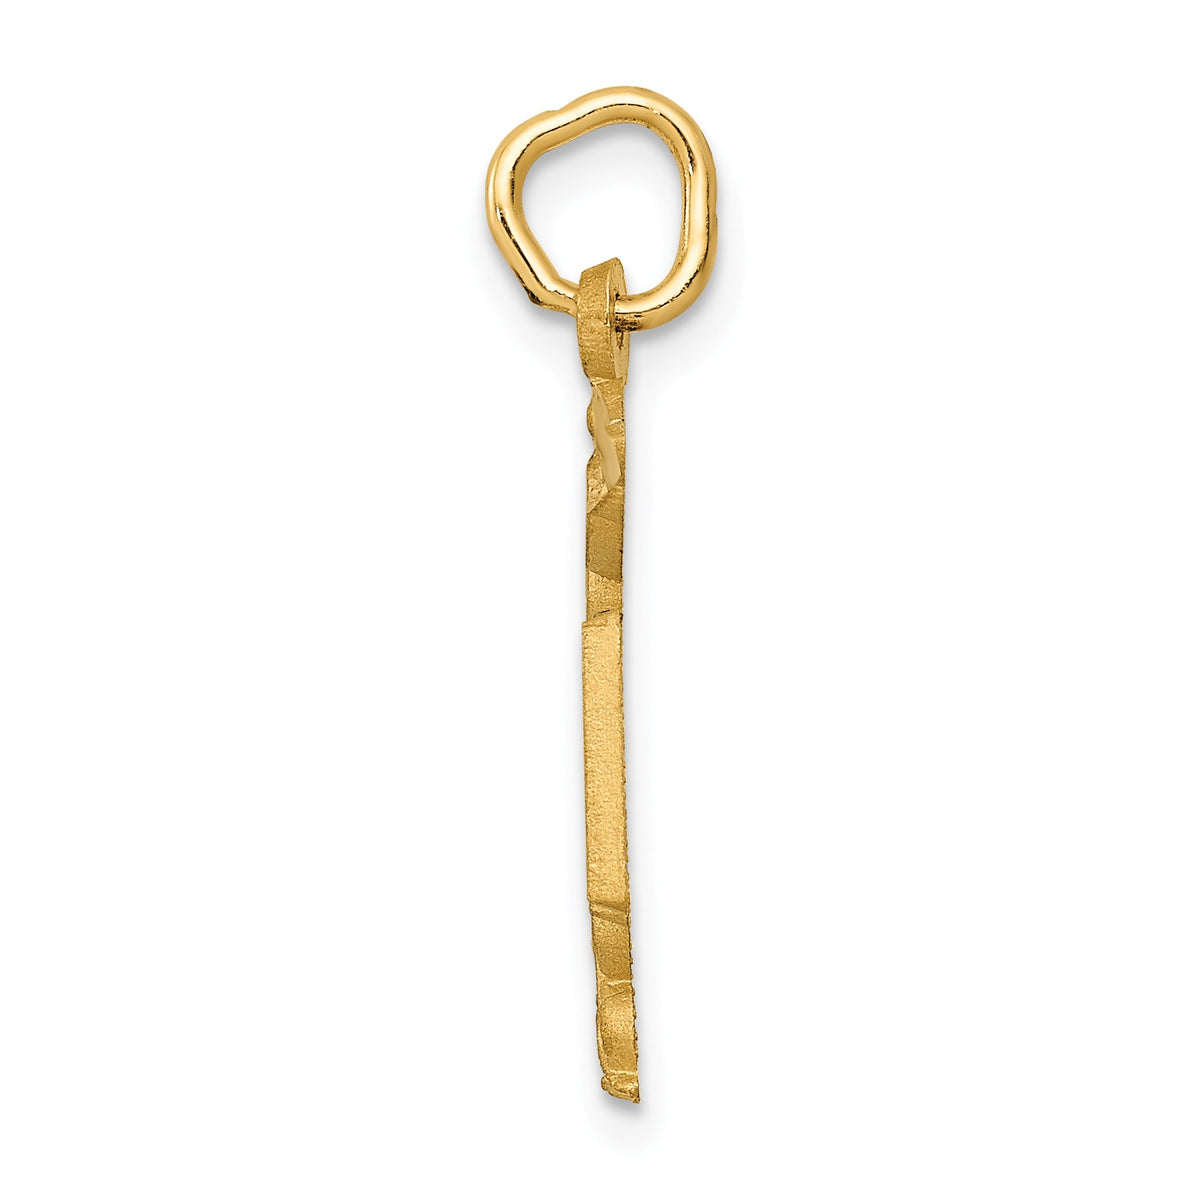 Alternate view of the 14k Yellow Gold Diamond Cut RN Charm by The Black Bow Jewelry Co.